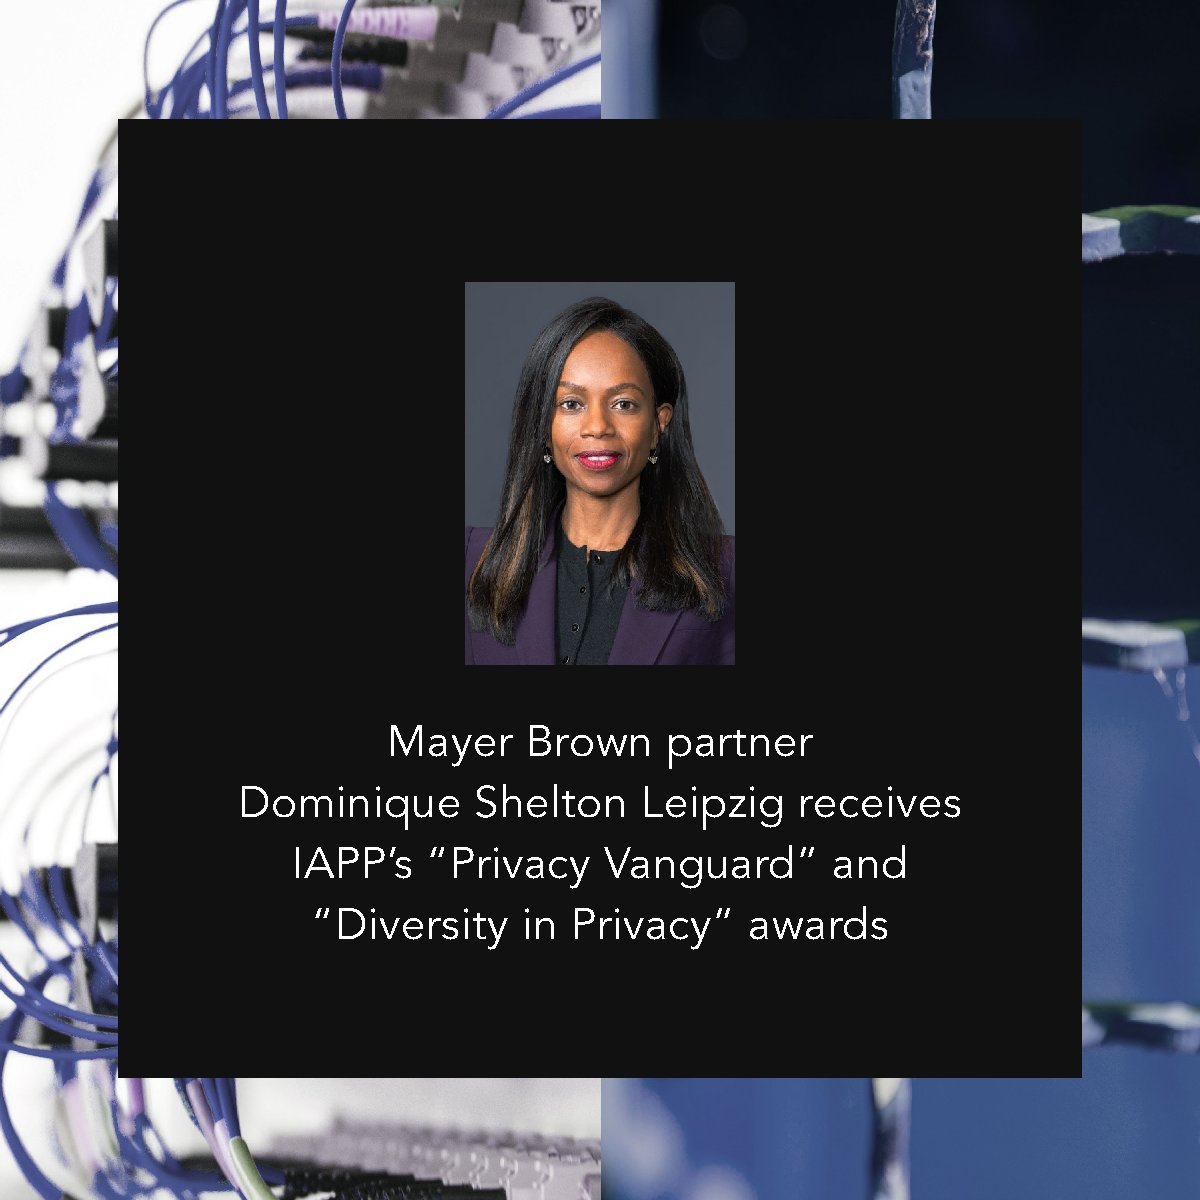 Cybersecurity & Data Privacy partner Dominique Shelton Leipzig has received the 2024 “Privacy Vanguard Award” and the “Diversity in Privacy Award” from @PrivacyPros! mayerbrown.com/en/news/2024/0… #AI #dataprotection